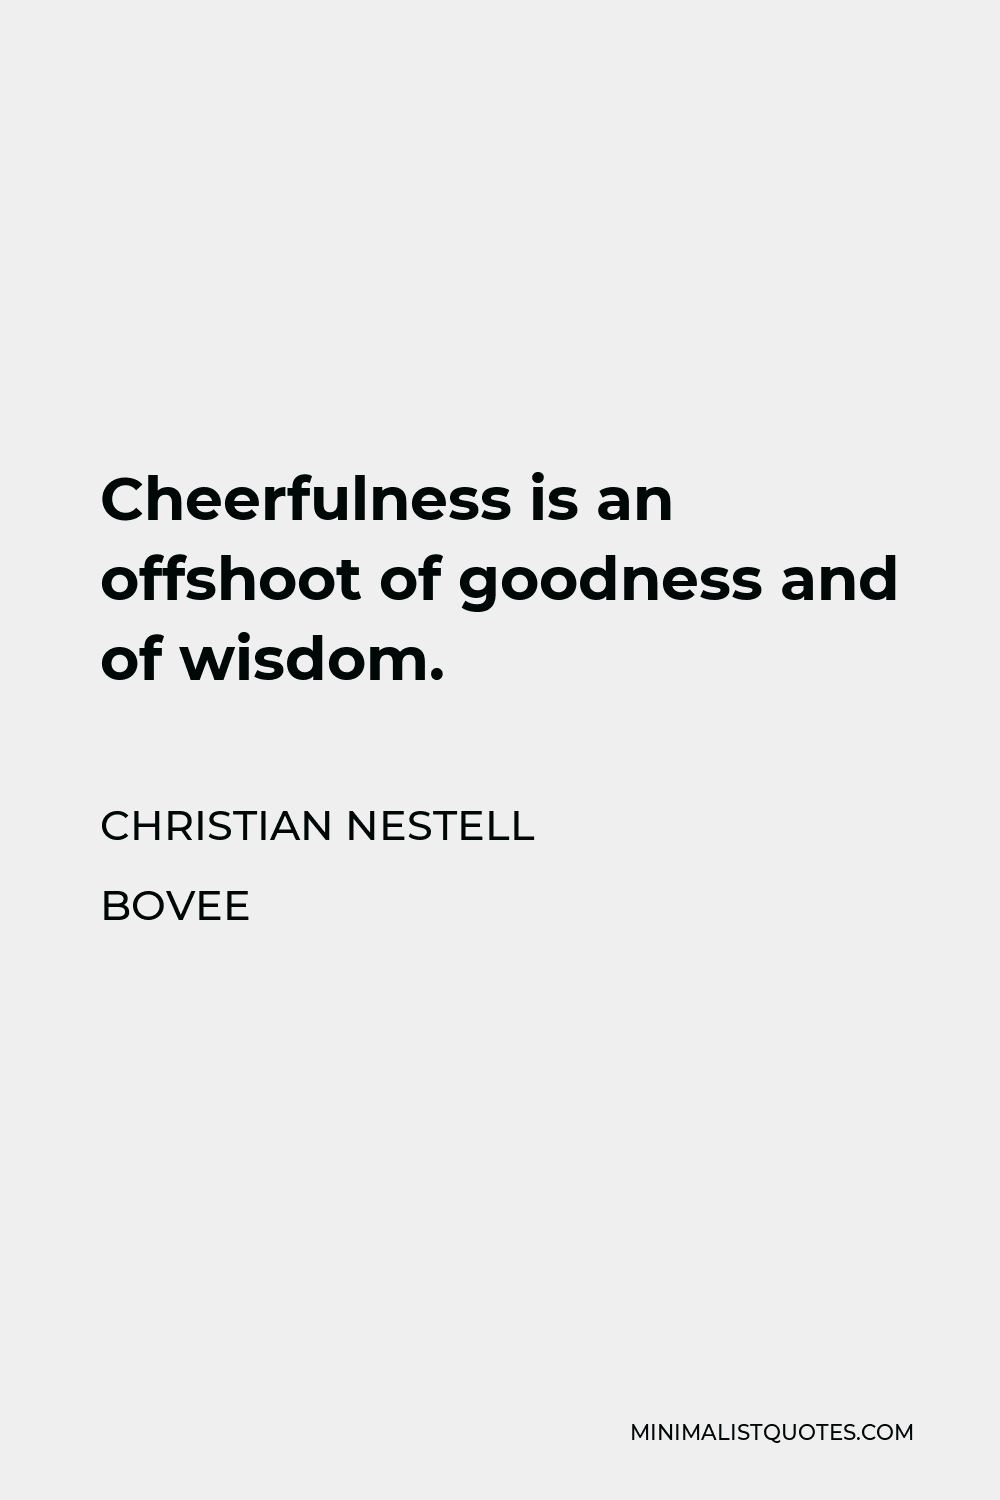 Christian Nestell Bovee Quote - Cheerfulness is an offshoot of goodness and of wisdom.